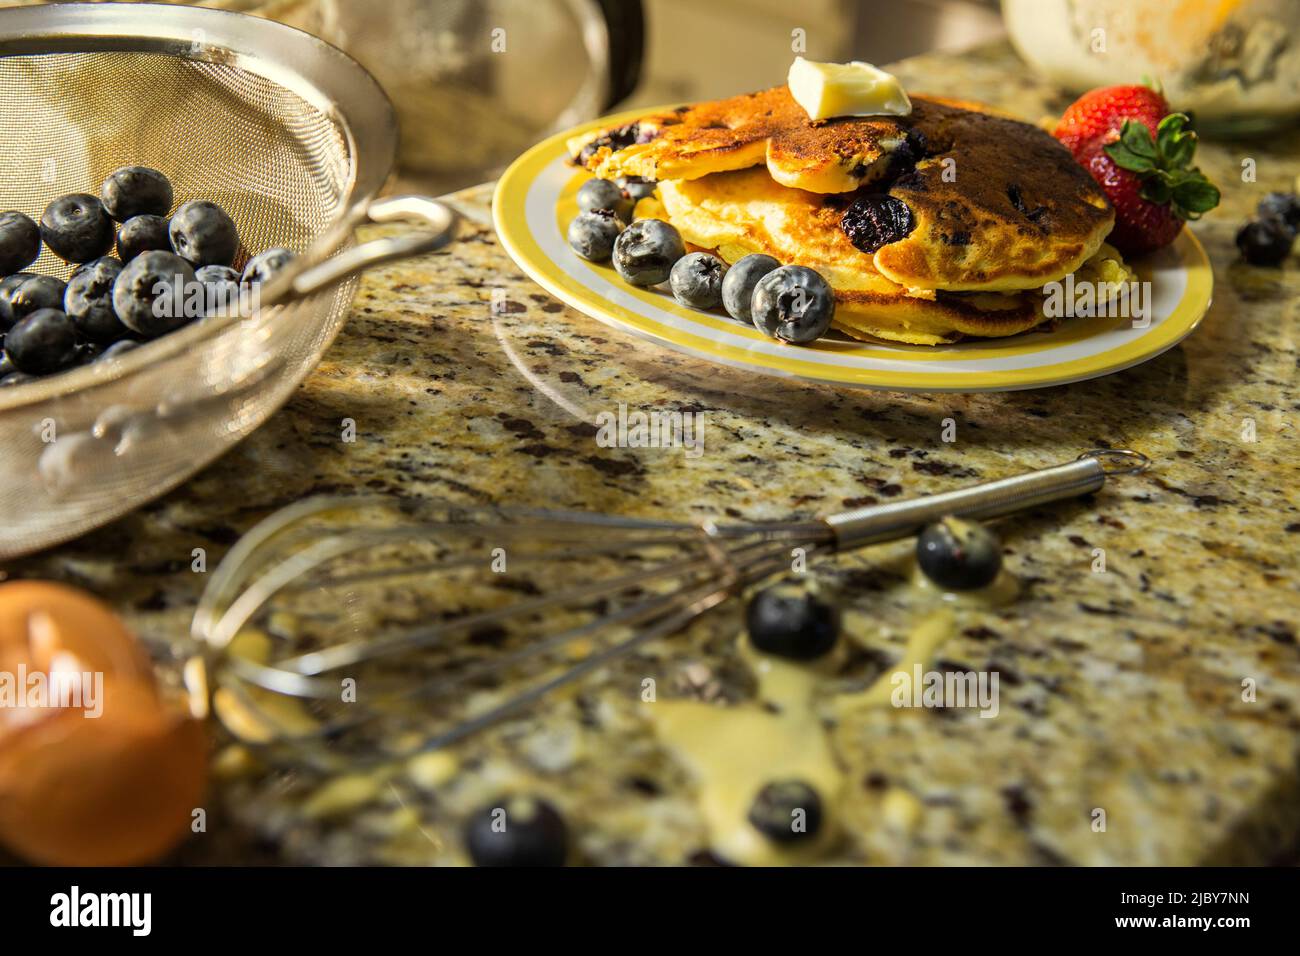 Detail of plate of pancakes with fruit on messy kitchen counter after making blueberry pancakes Stock Photo